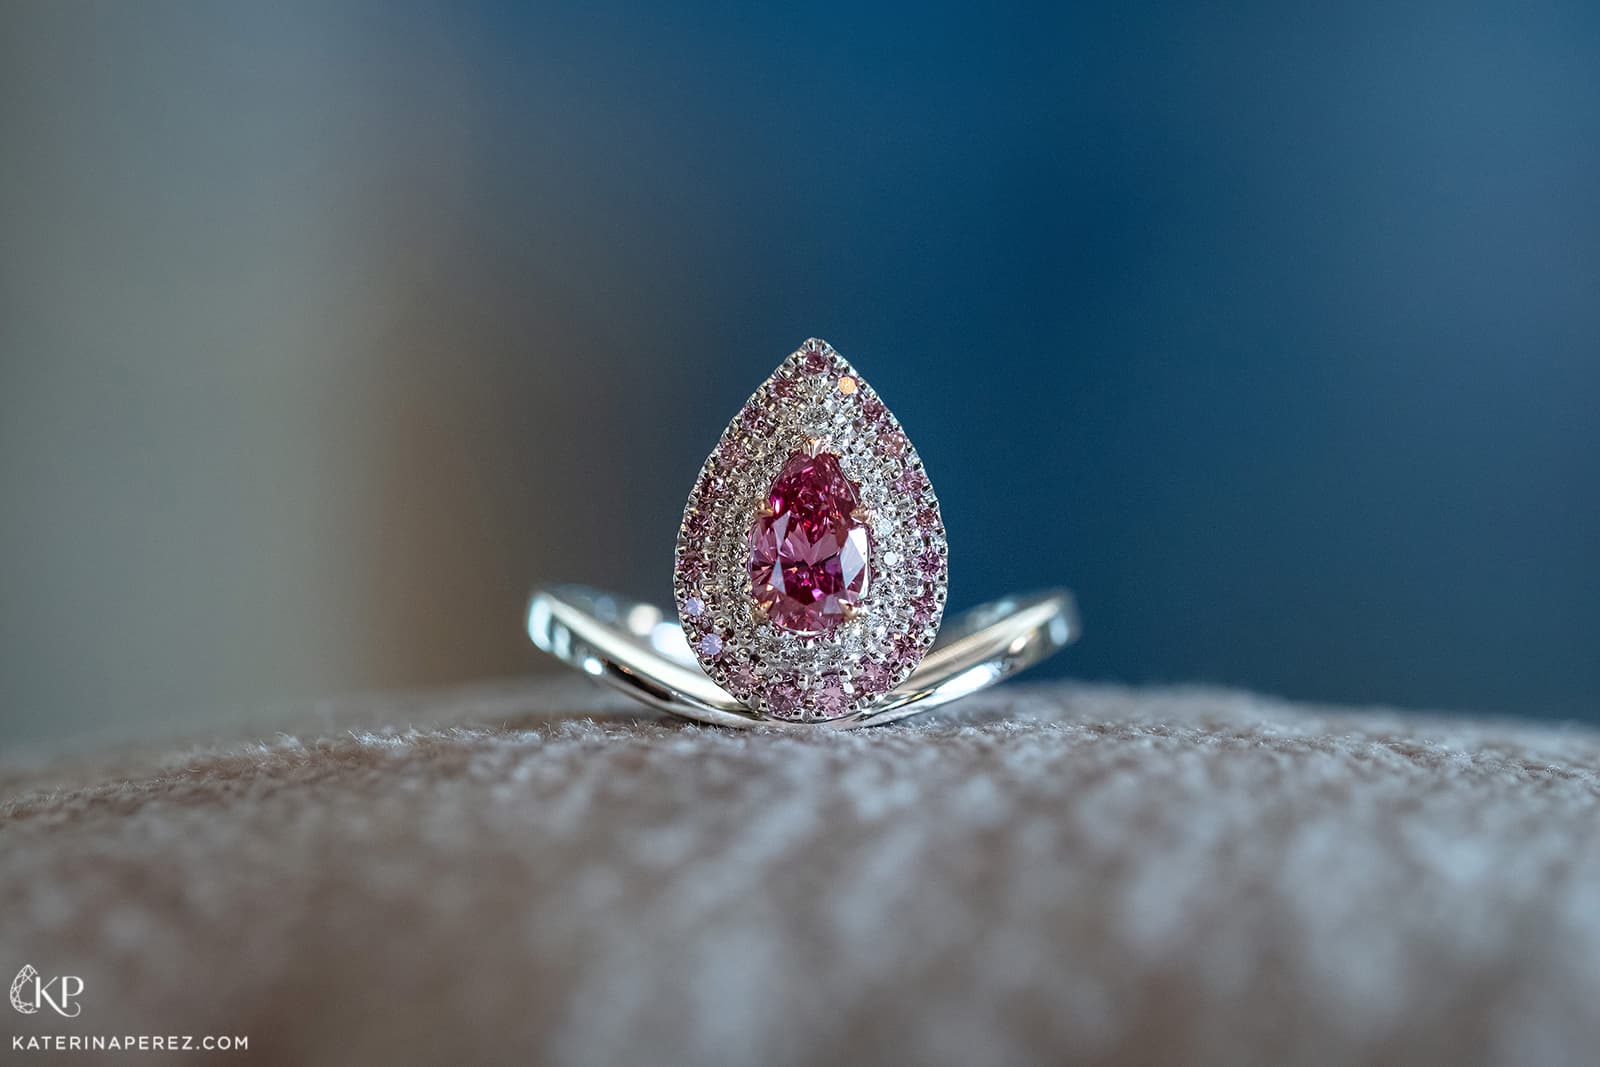 Calleija ‘Couture’ collection ‘Calla’ ring with 0.52ct pear shape Vivid Purplish Pink Argyle Pink Tender diamond, colourless and pink diamonds set in rose gold and platinum